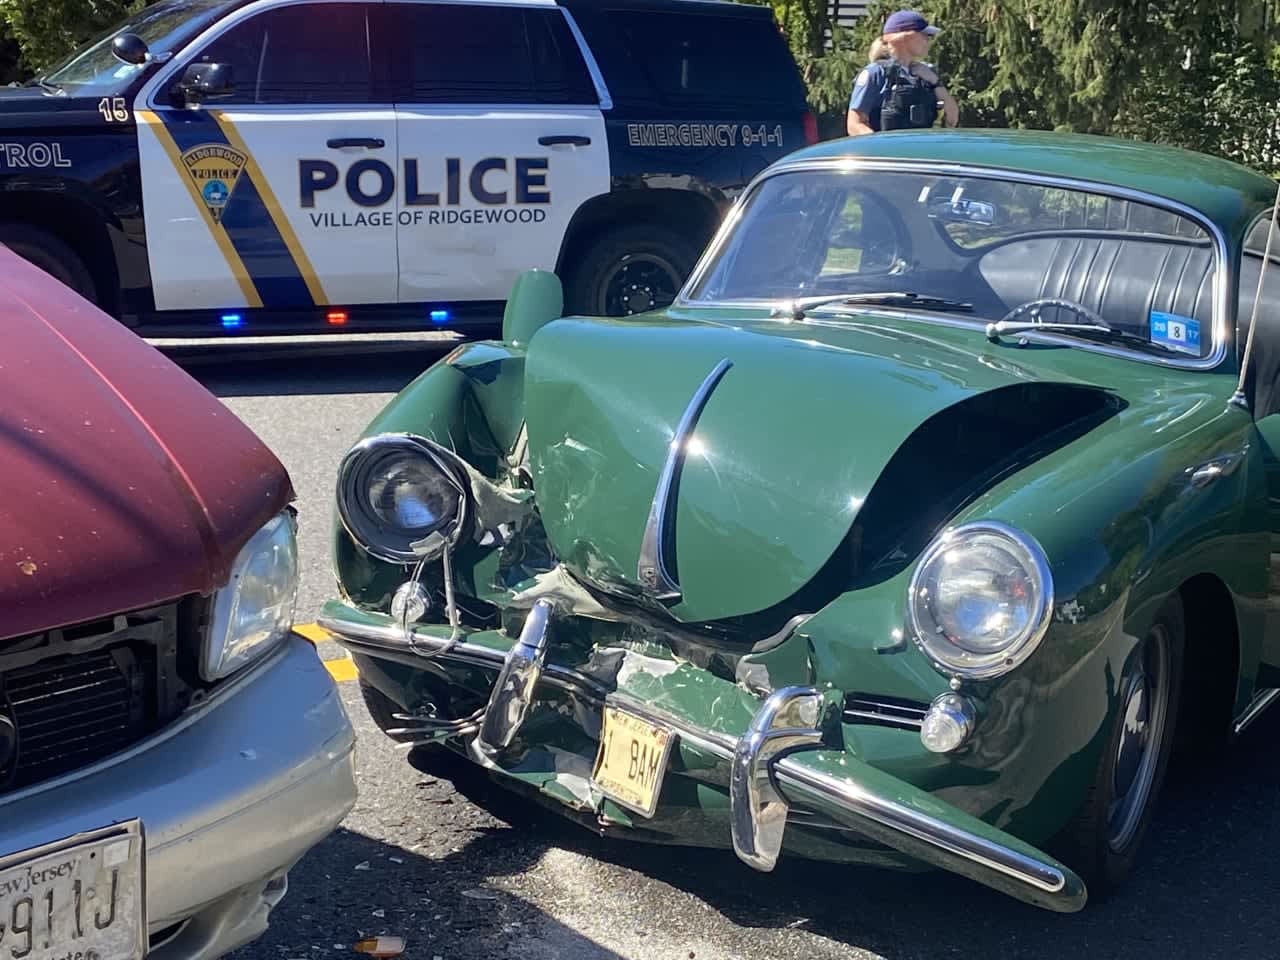 The 1965 Porsche 356 and minivan collided at the intersection of Franklin Turnpike and Nagle Street in Ridgewood on Friday, Sept. 23.